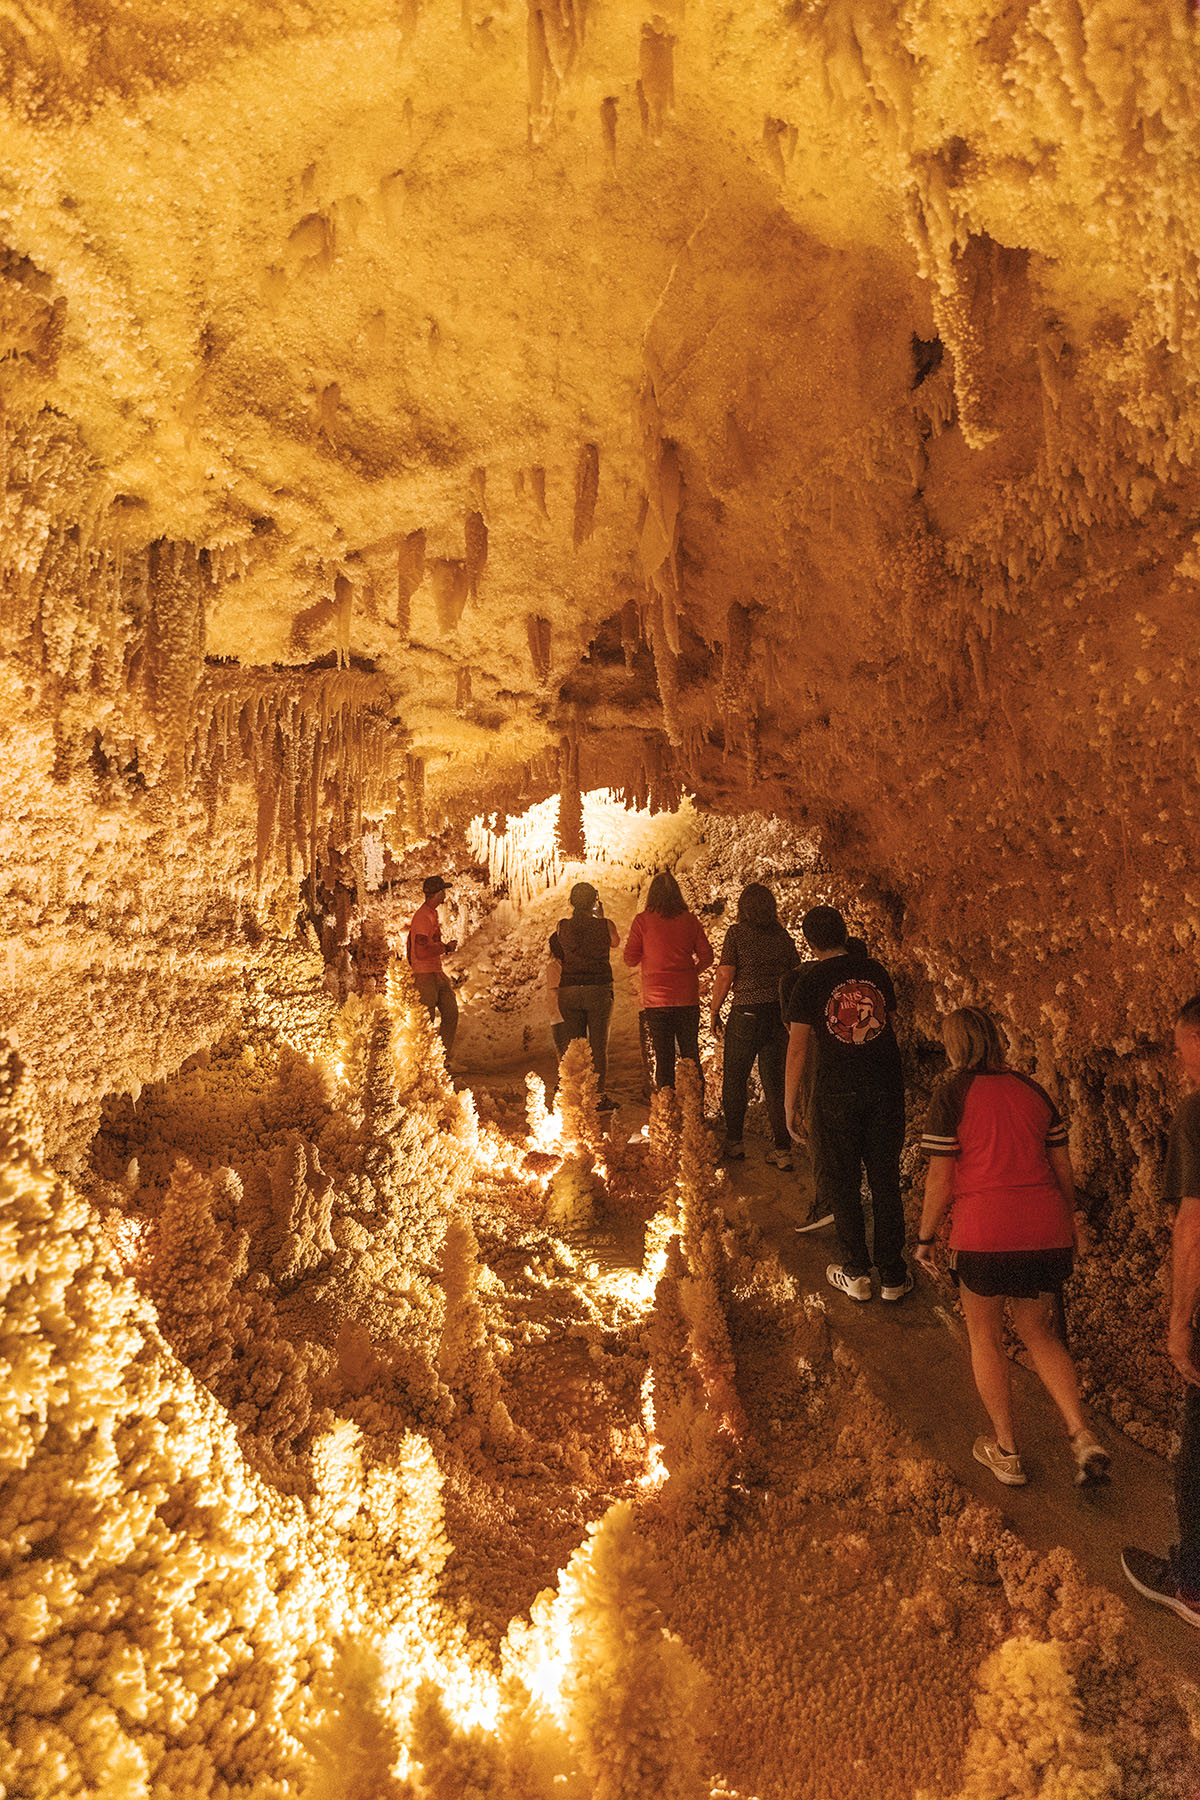 A group of people walk through a golden-colored cavern with large rock outcroppings